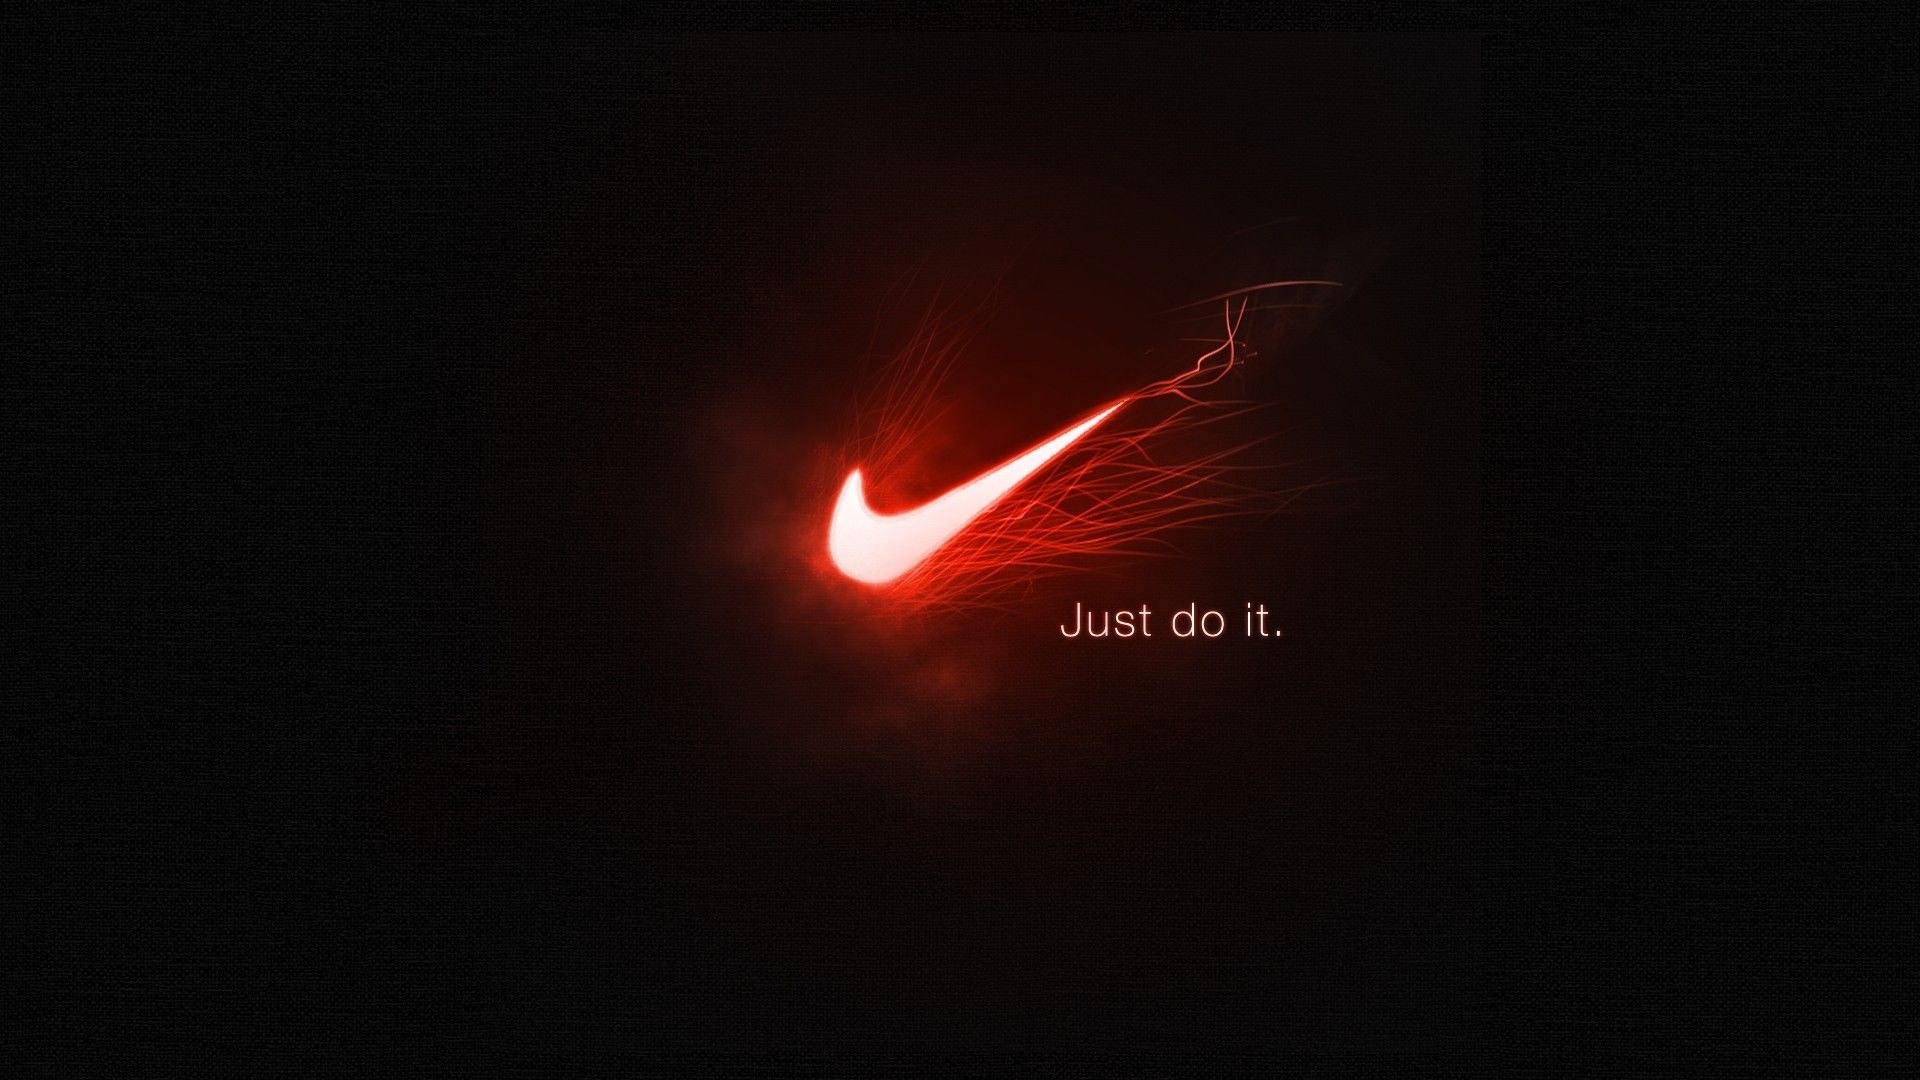 1920x1080 Nike Just Do It Wallpapers High Quality